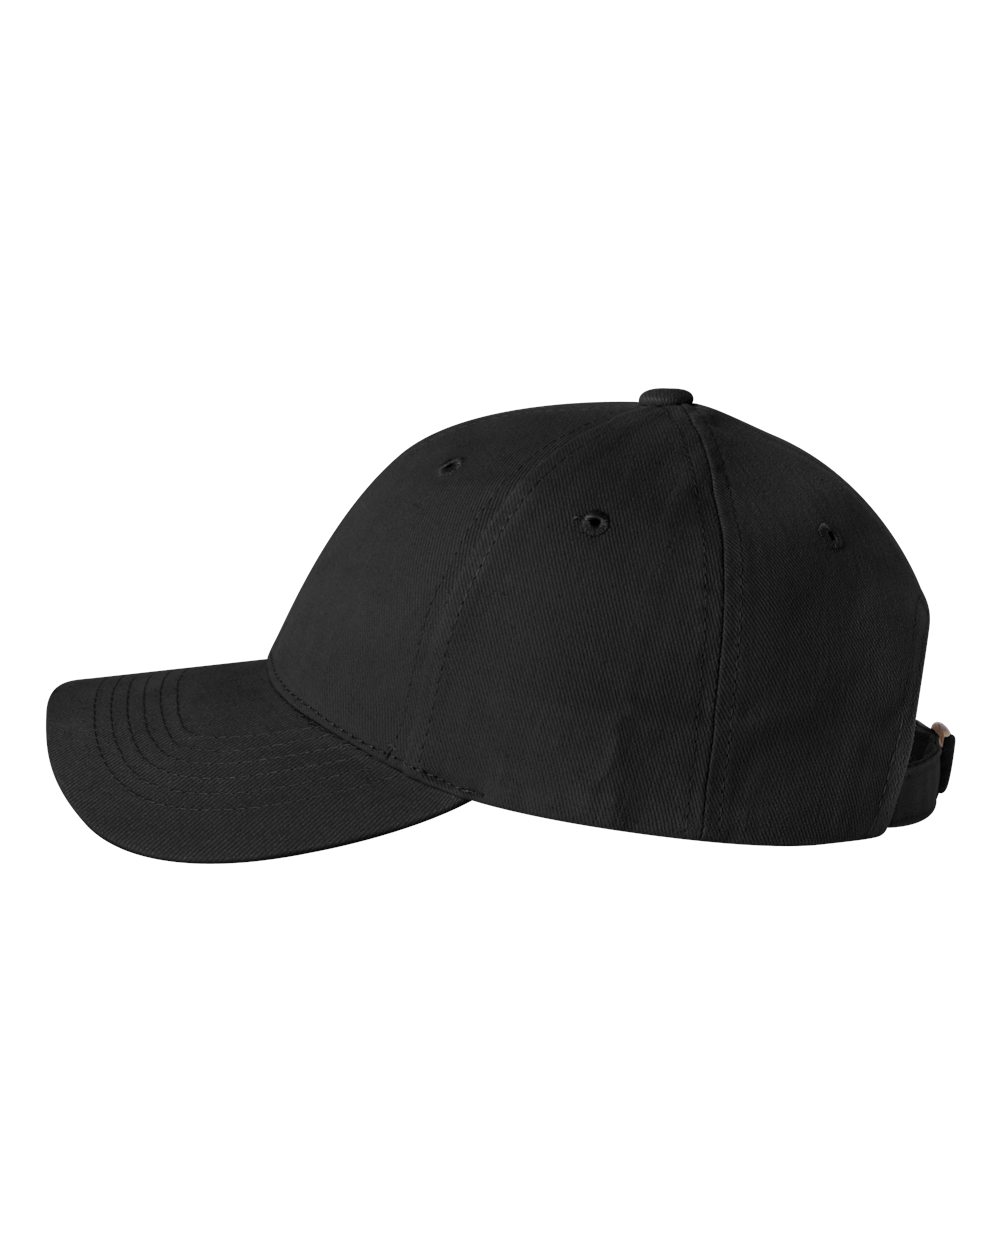 'Sportsman 9910 Structured Heavy Brushed Twill Cap'